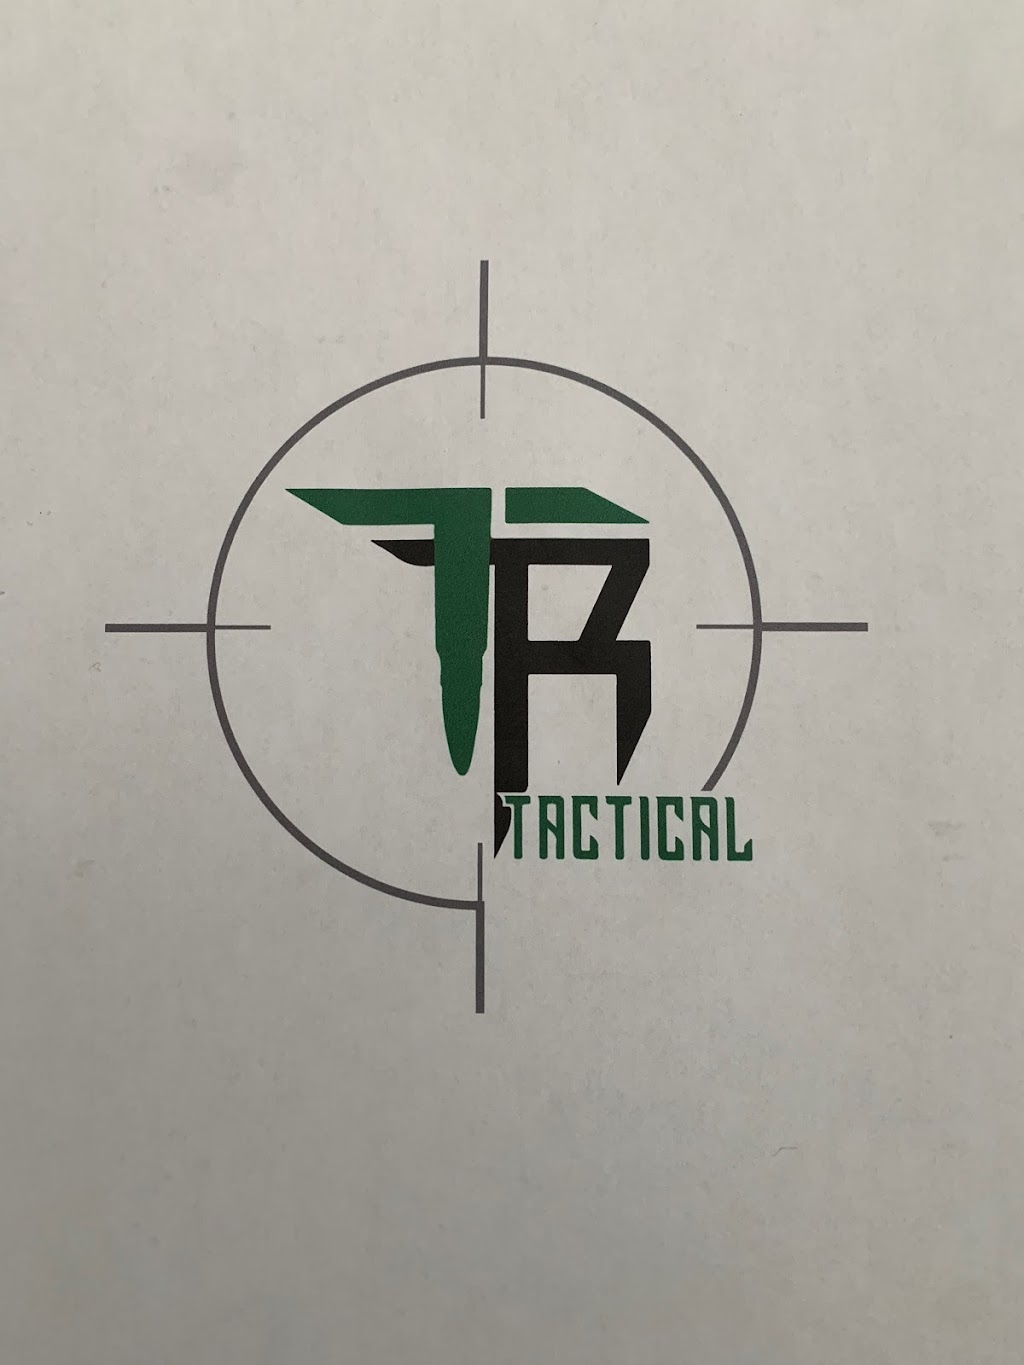 T & R Tactical Weapons and Consulting LLC | Shark River Hills, Neptune Township, NJ 07753 | Phone: (732) 585-9347